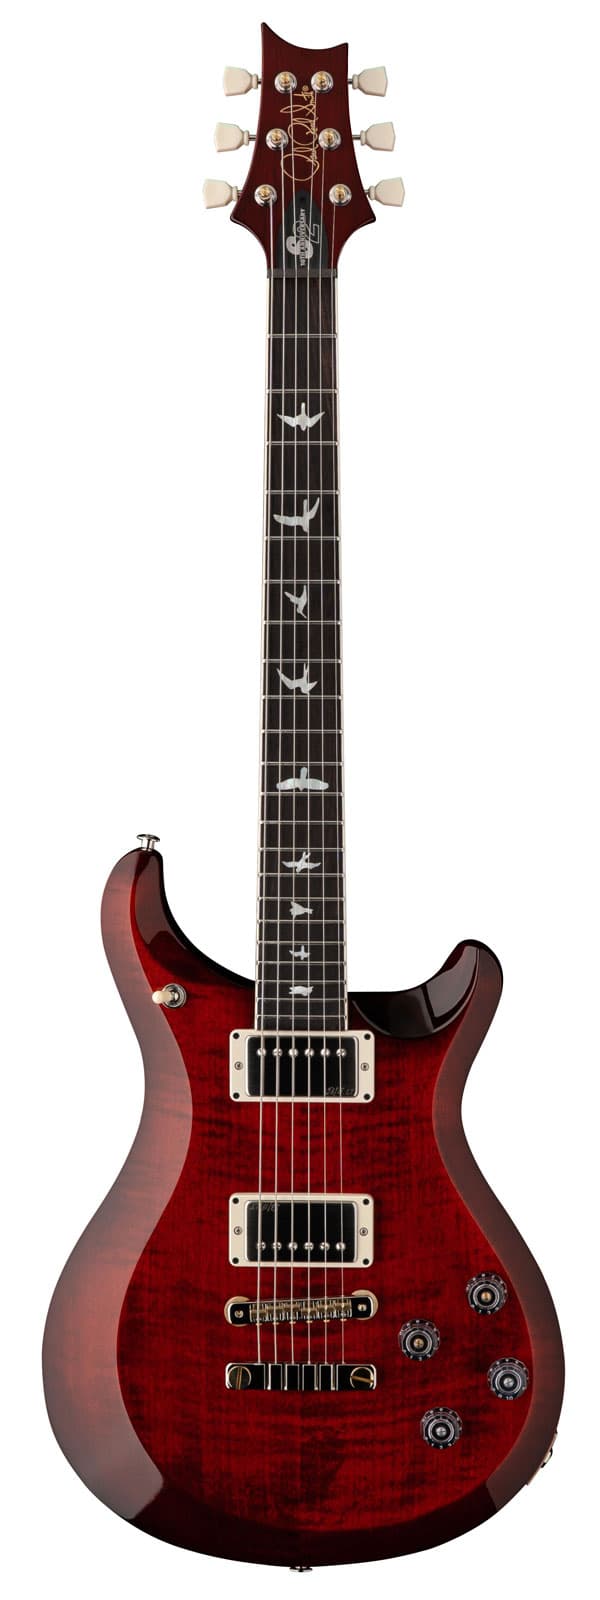 PRS - PAUL REED SMITH S2 MCCARTY 594 10TH LTD FIRE RED BURST